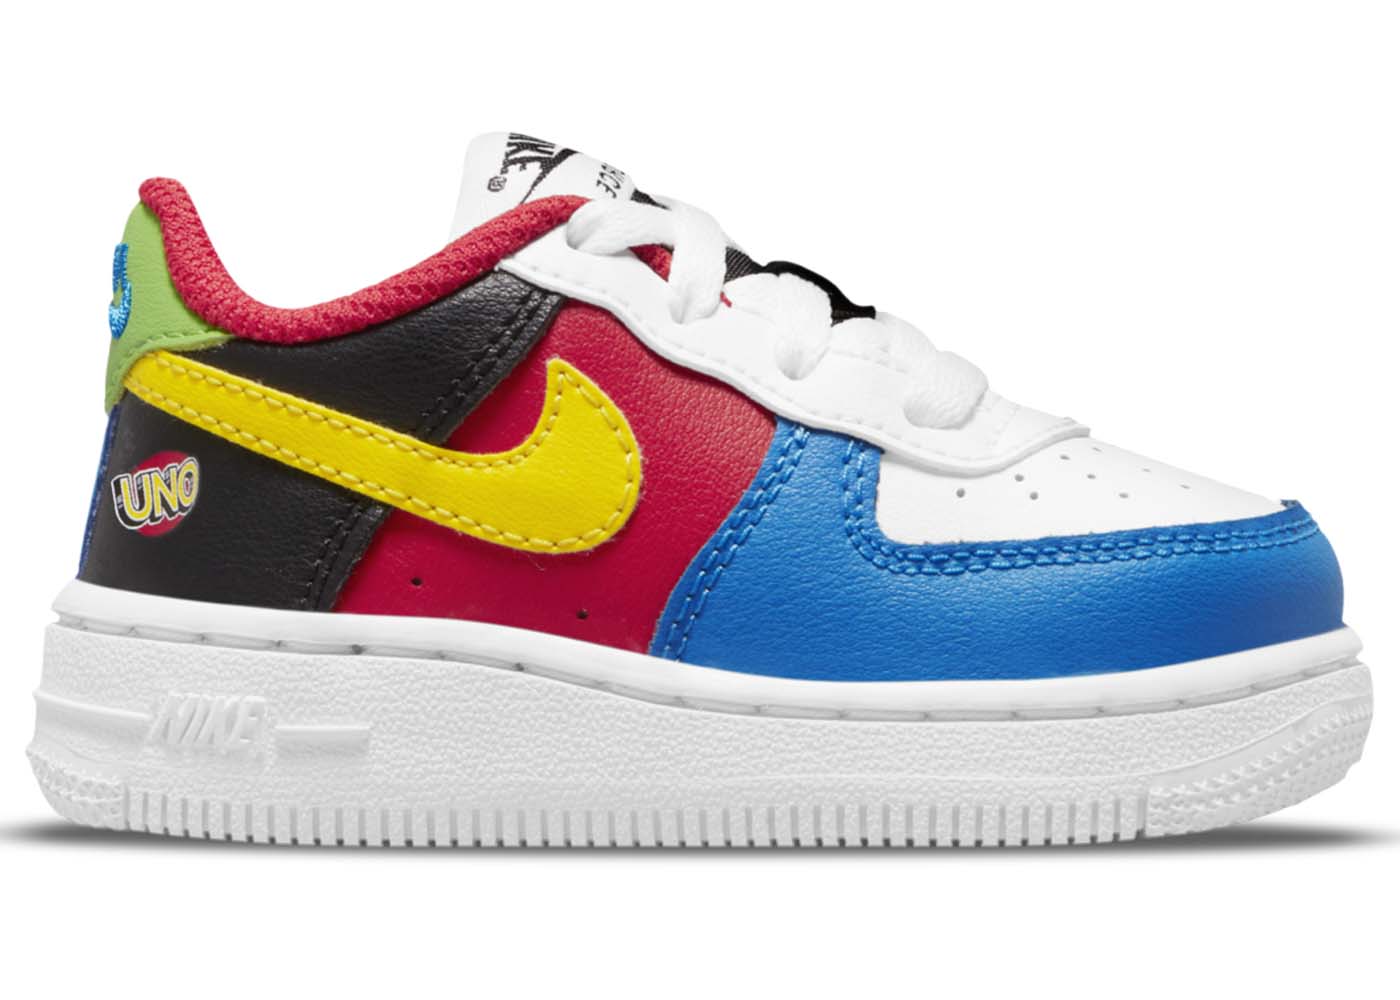 Nike Air Force 1 Low LV8 QS Uno (TD)